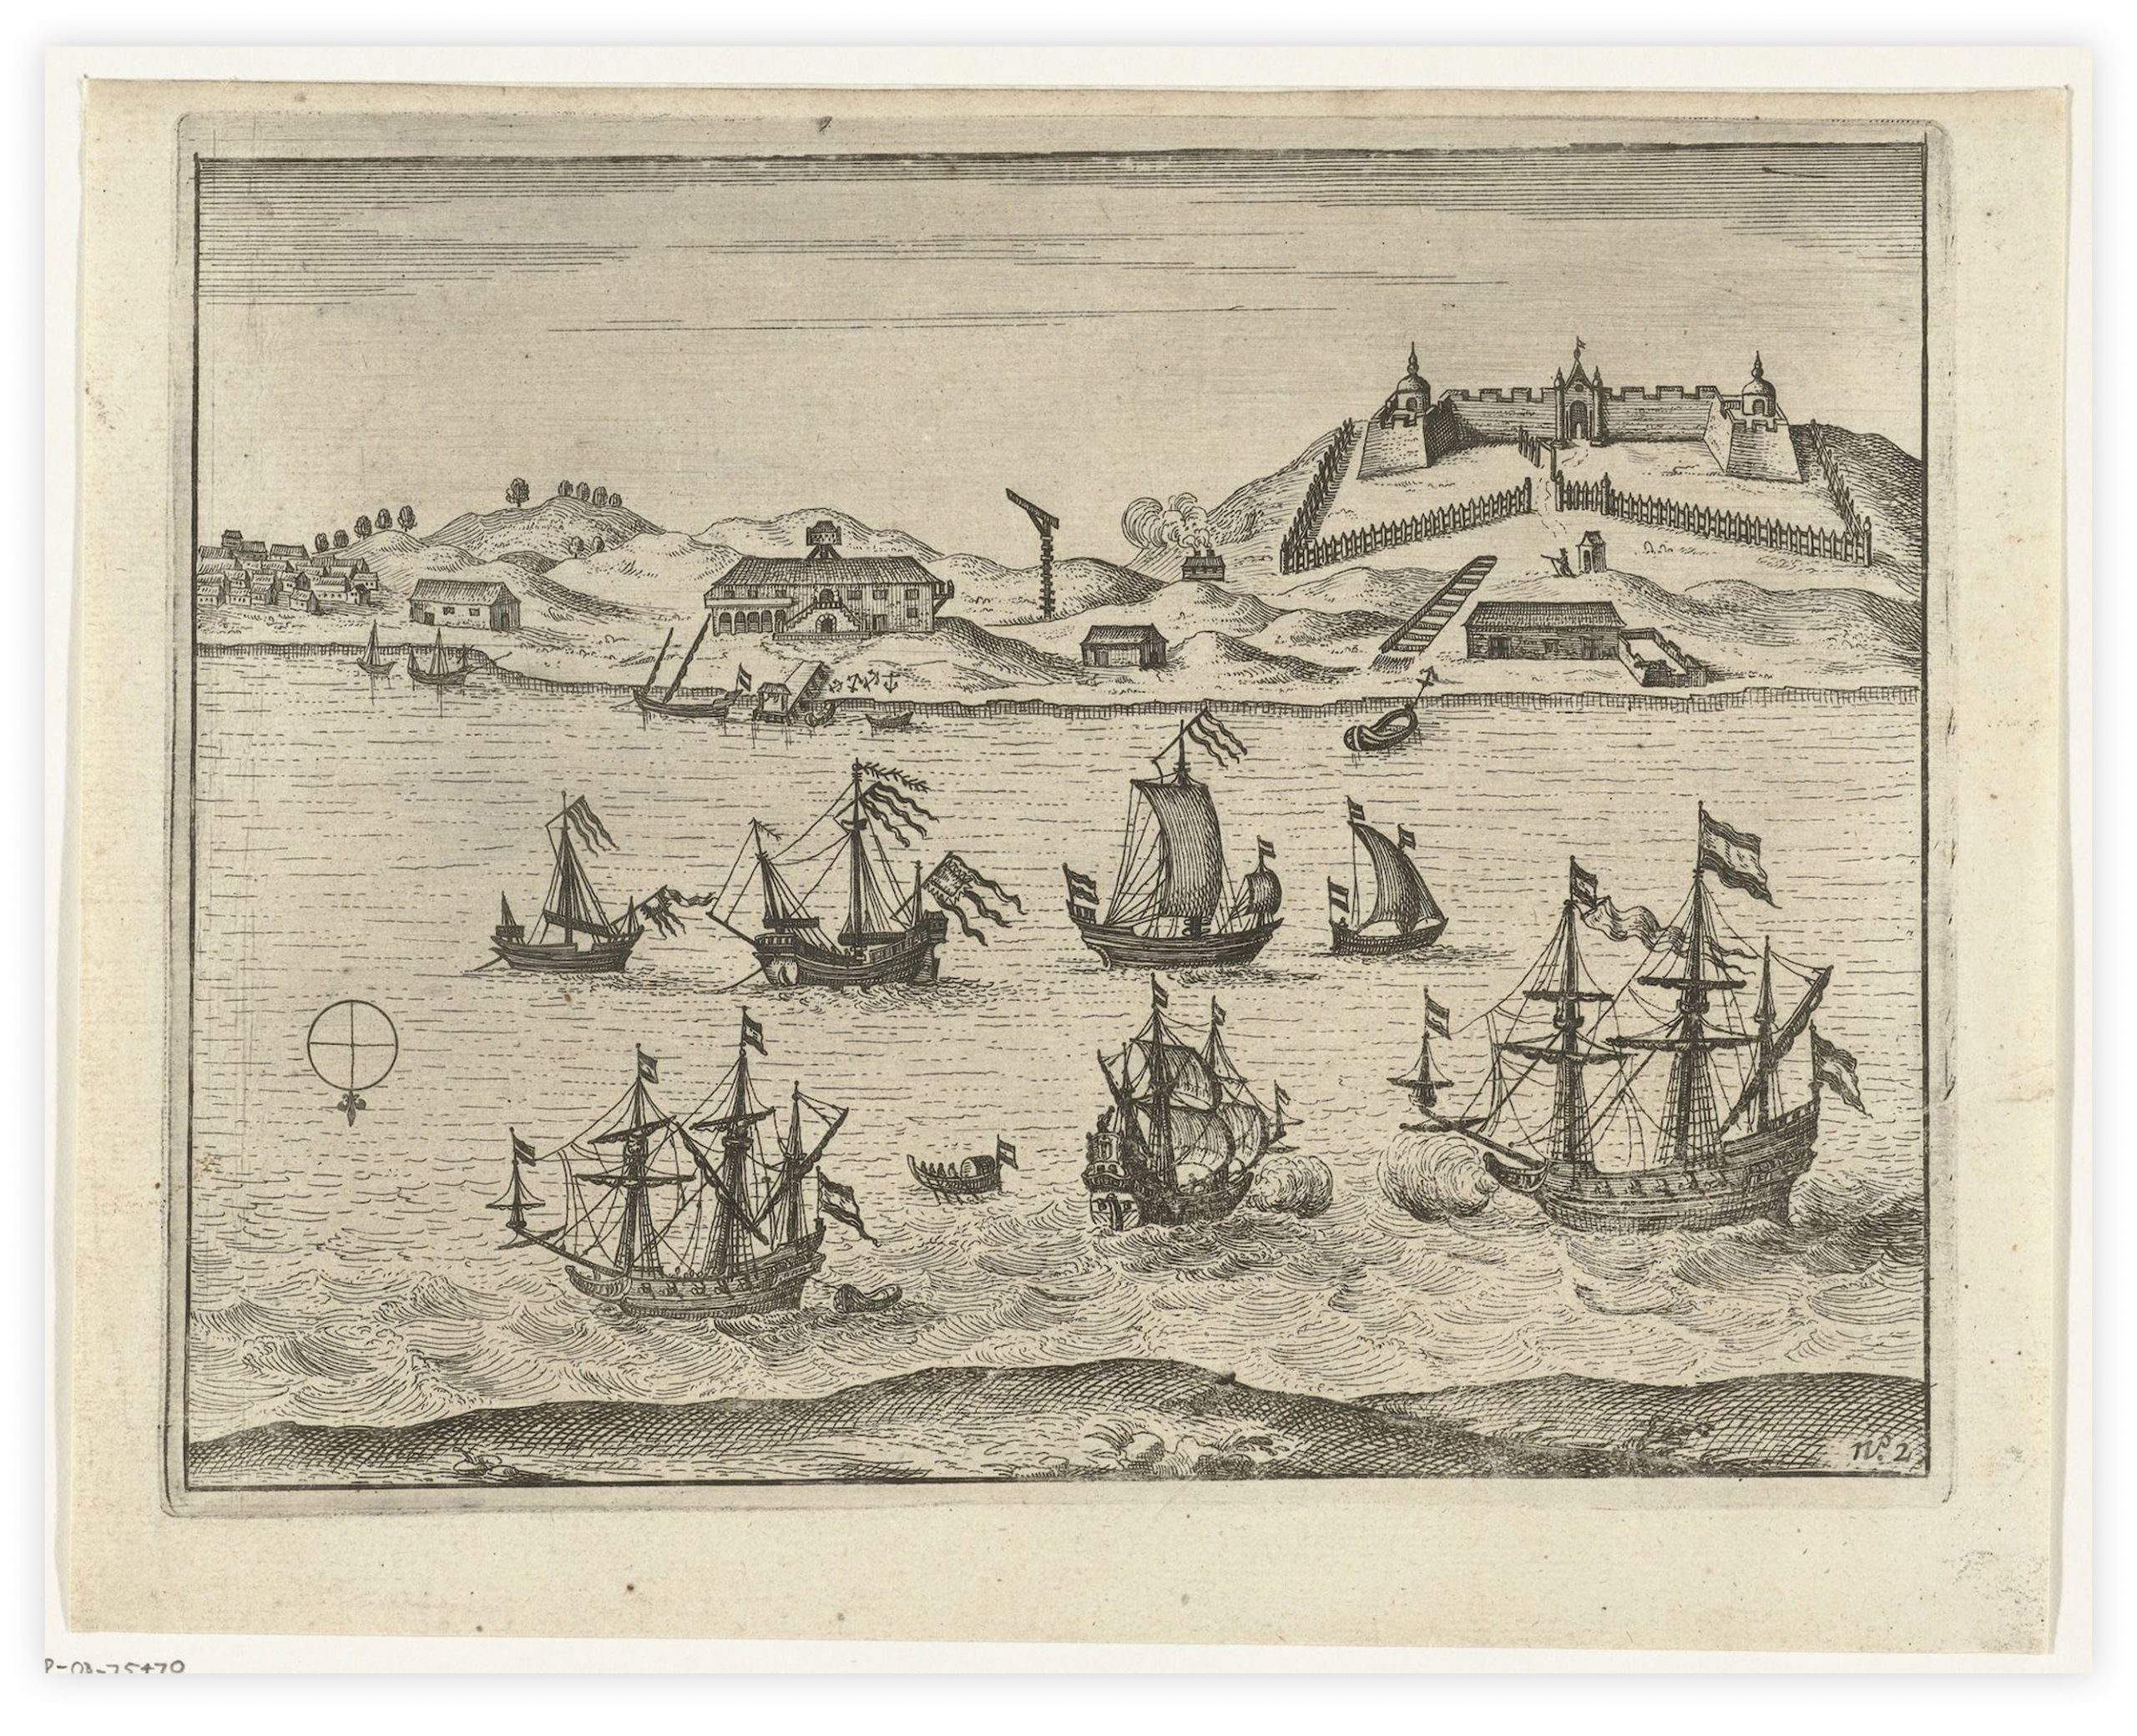 A drawing depicting Fort Zeelandia from the sea. Seven ships in the foreground. On land can be viewed several buildings and a fort surrounded by a fence.